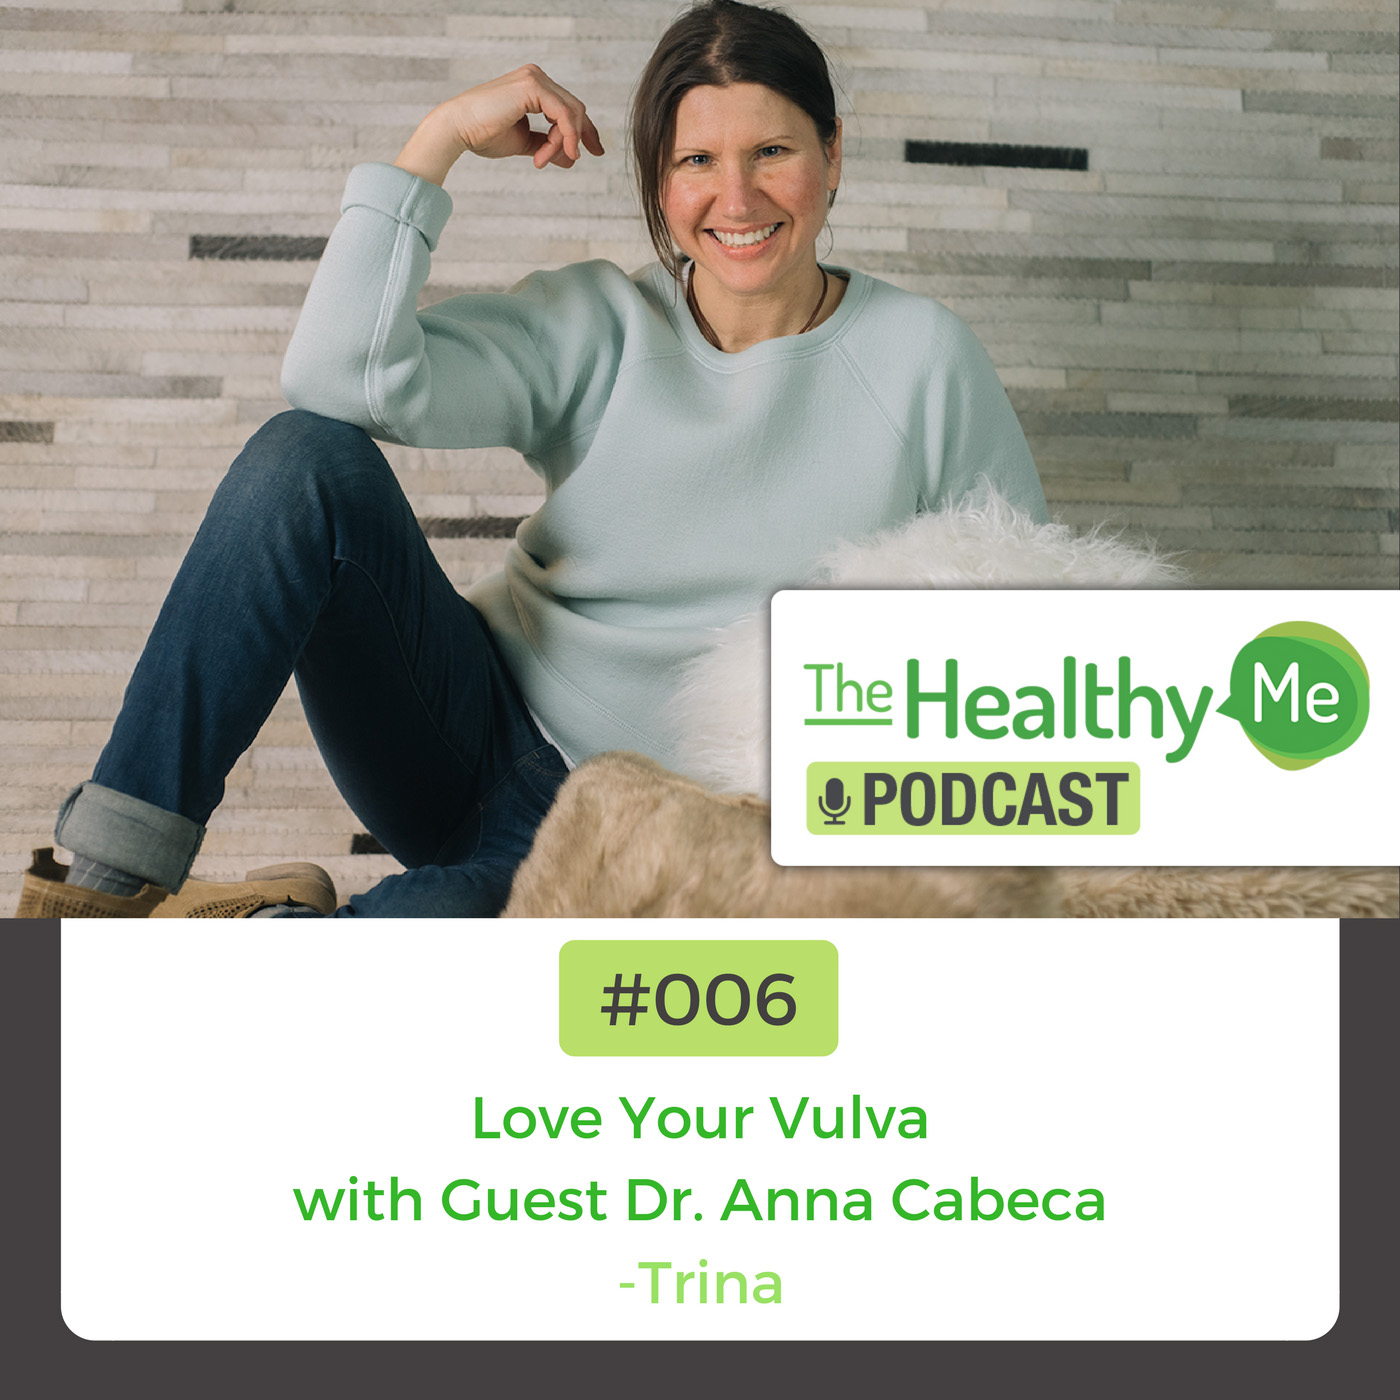 Love Your Vulva | The Healthy Me Podcast Episode 006